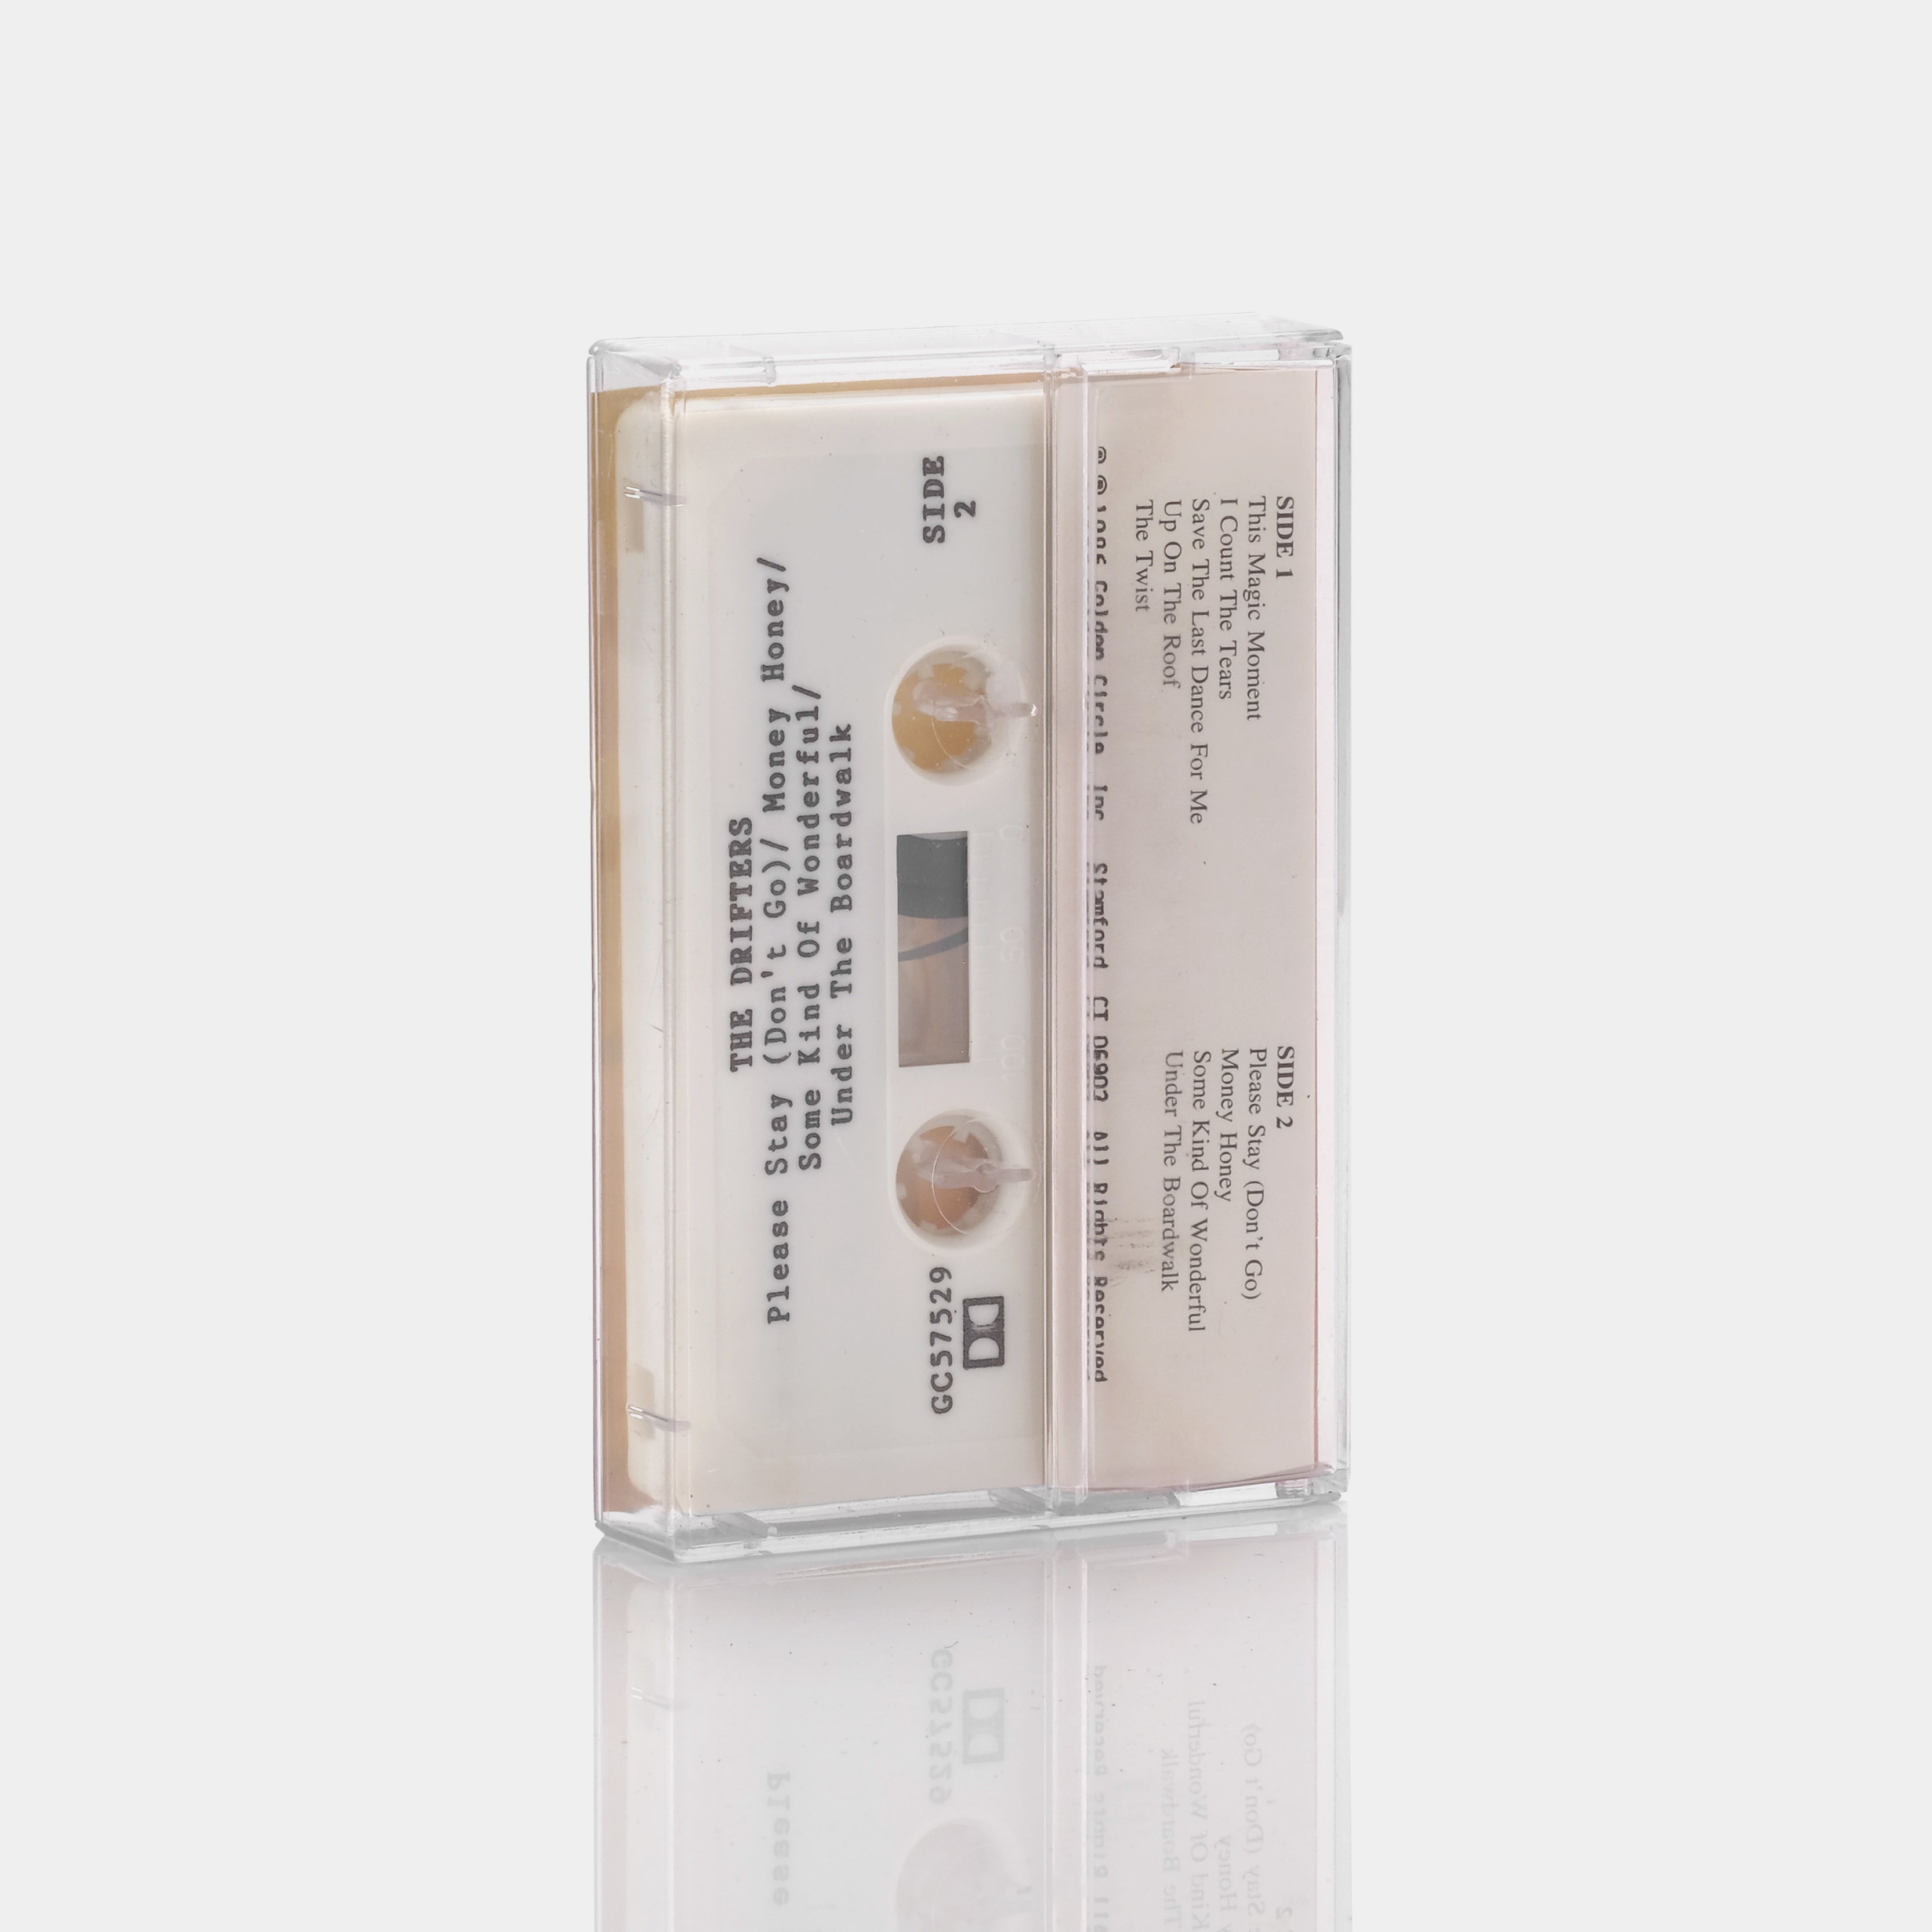 The Drifters - Live Cassette Tape